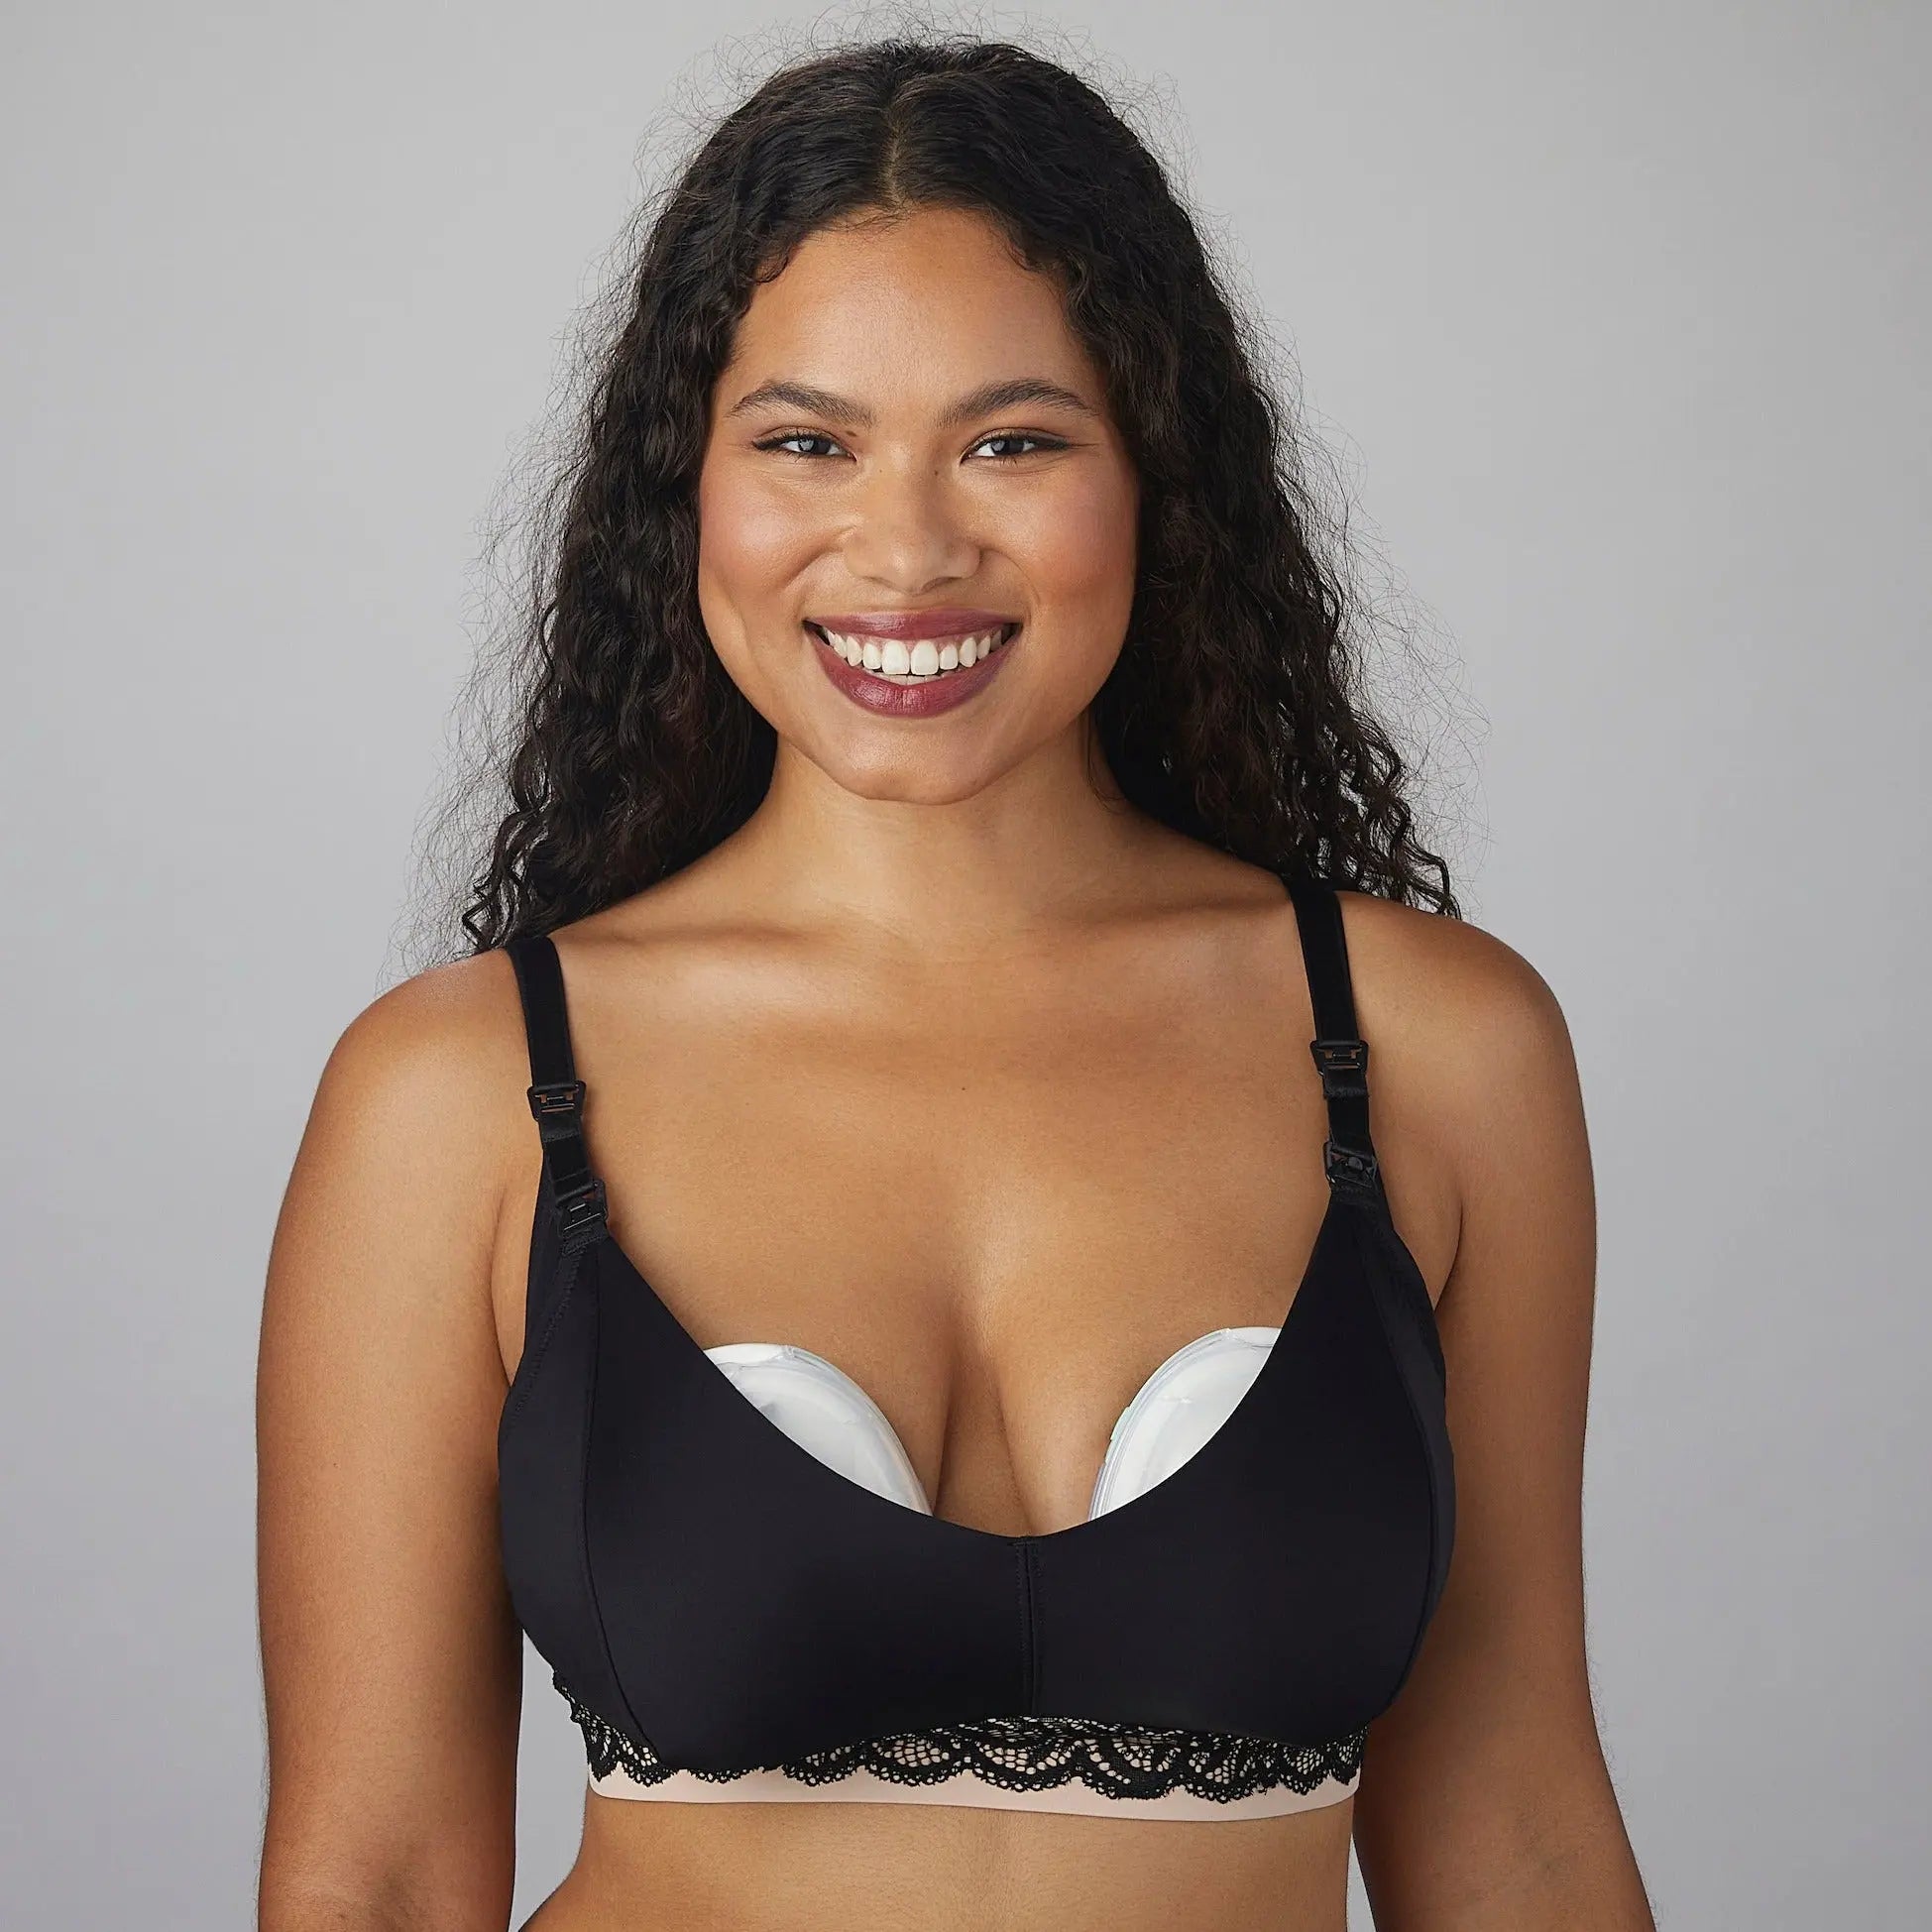 Luxe pumping bra black image from the front, woman lounging